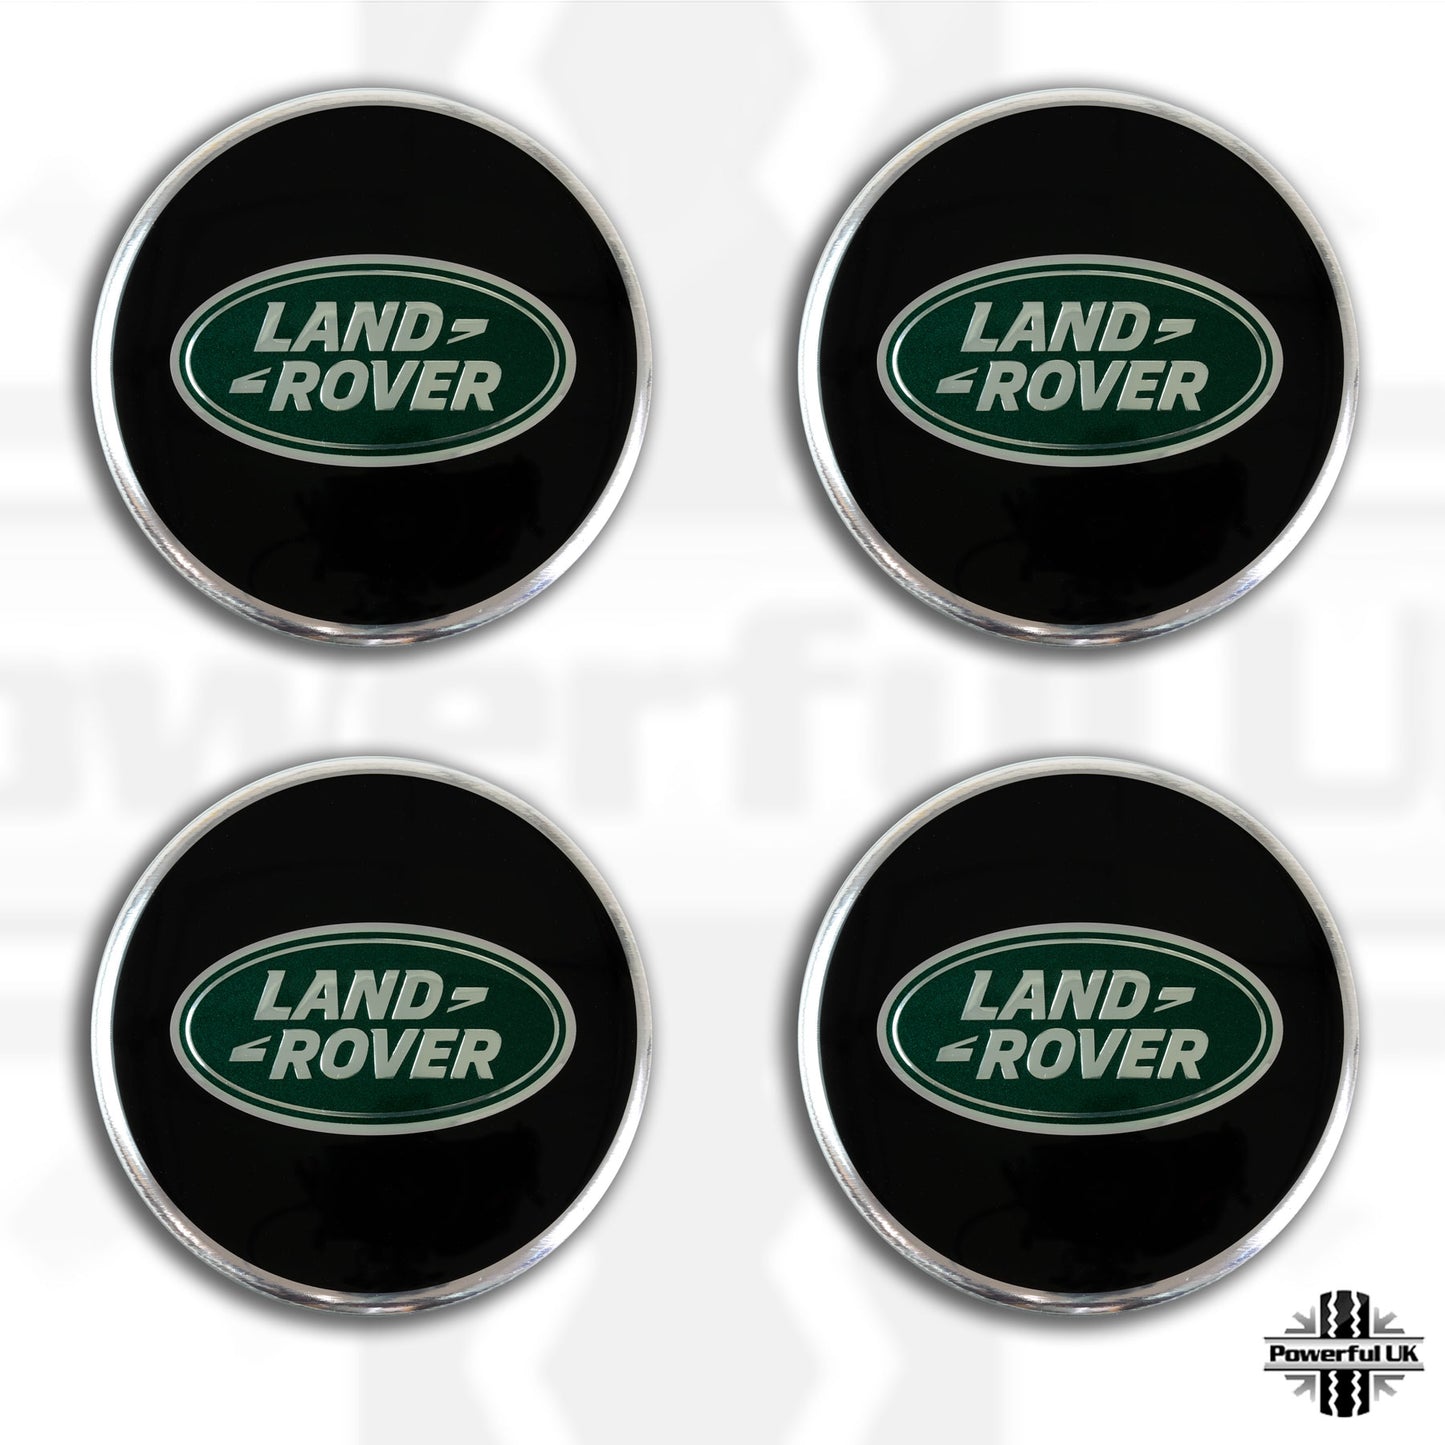 Genuine 4x Black & Green Alloy Wheel Center Caps for Land Rover Discovery 3 & 4